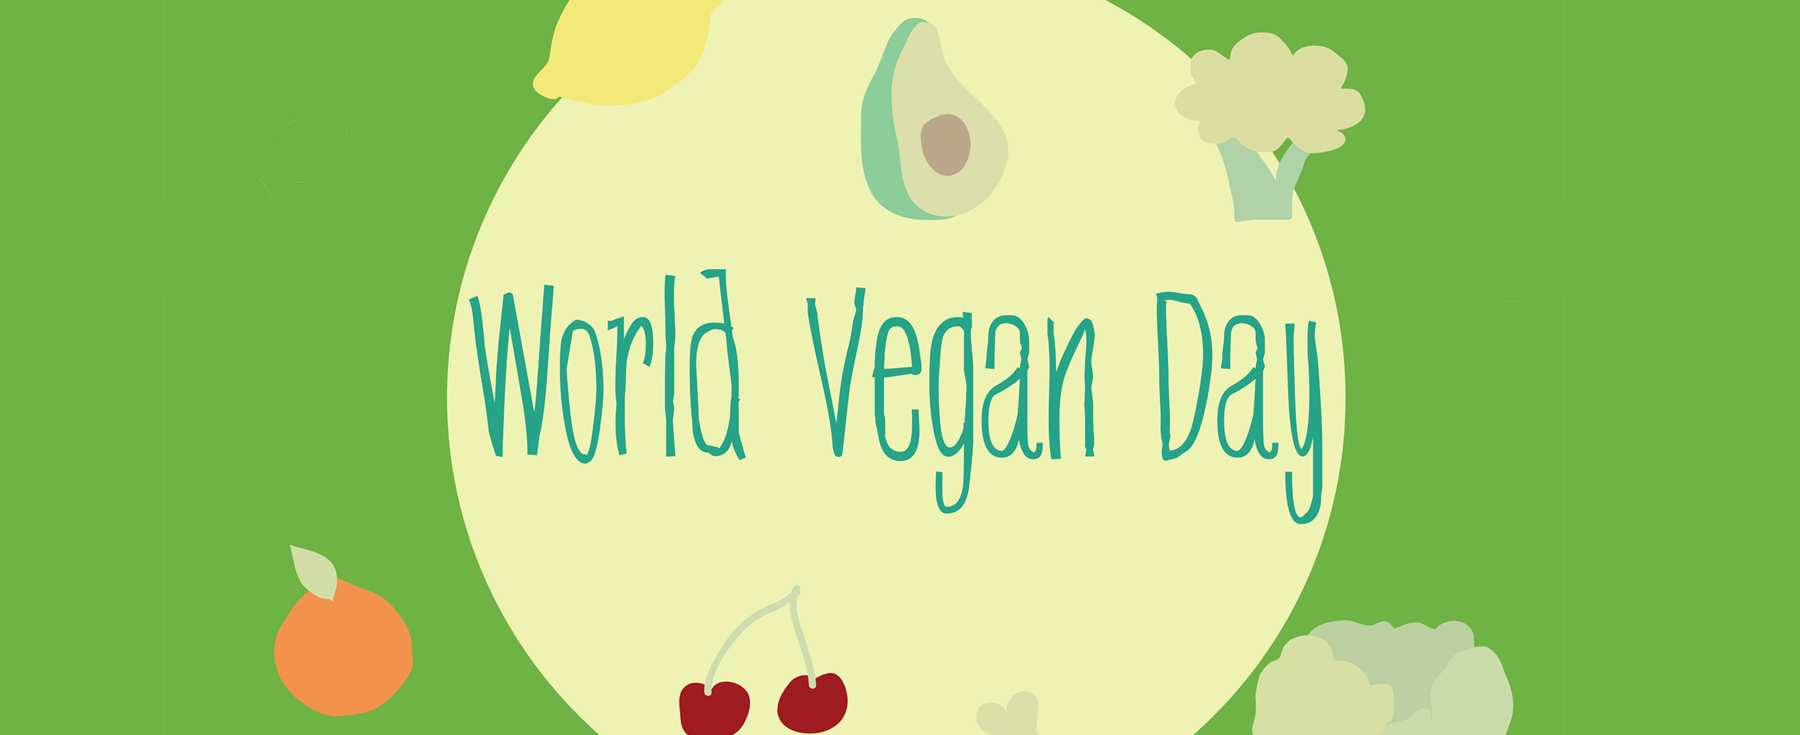 World Vegan Day Facebook Cover Picture